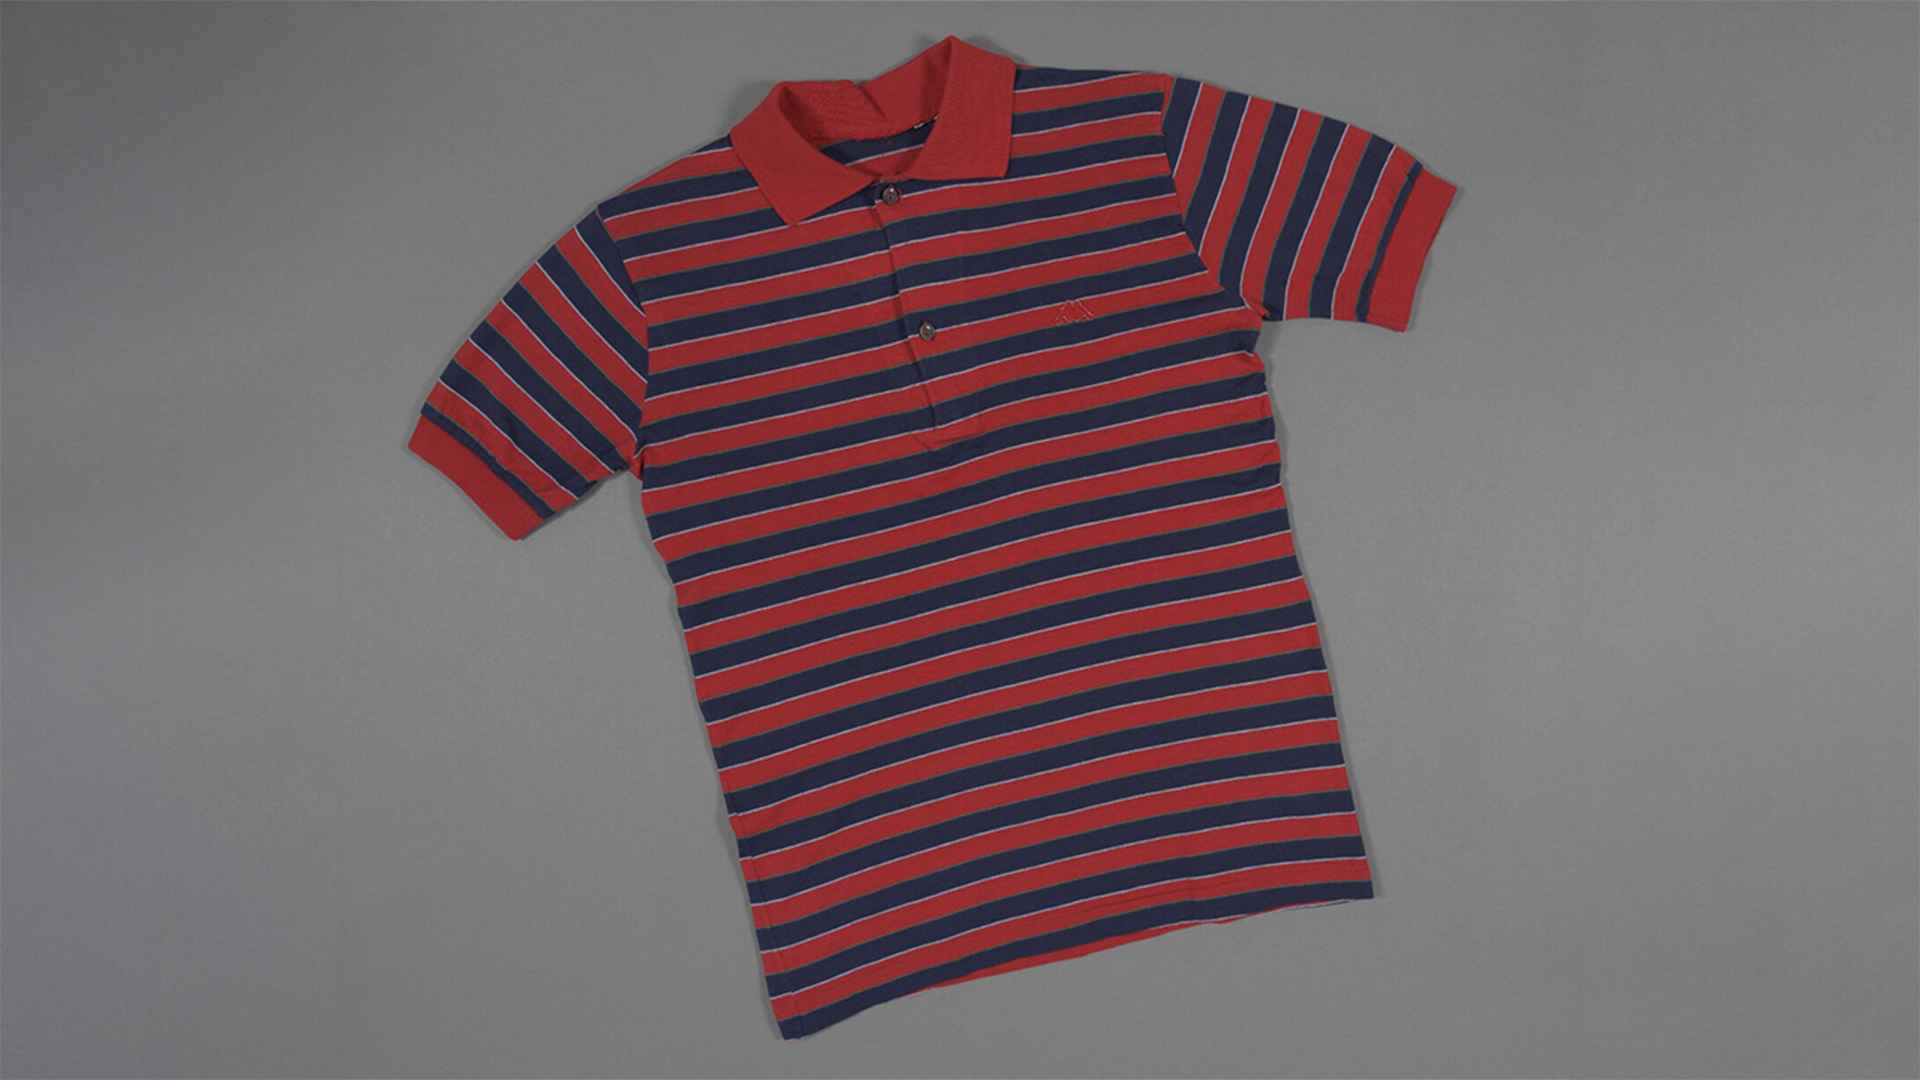 Blue and red striped Kappa t-shirt